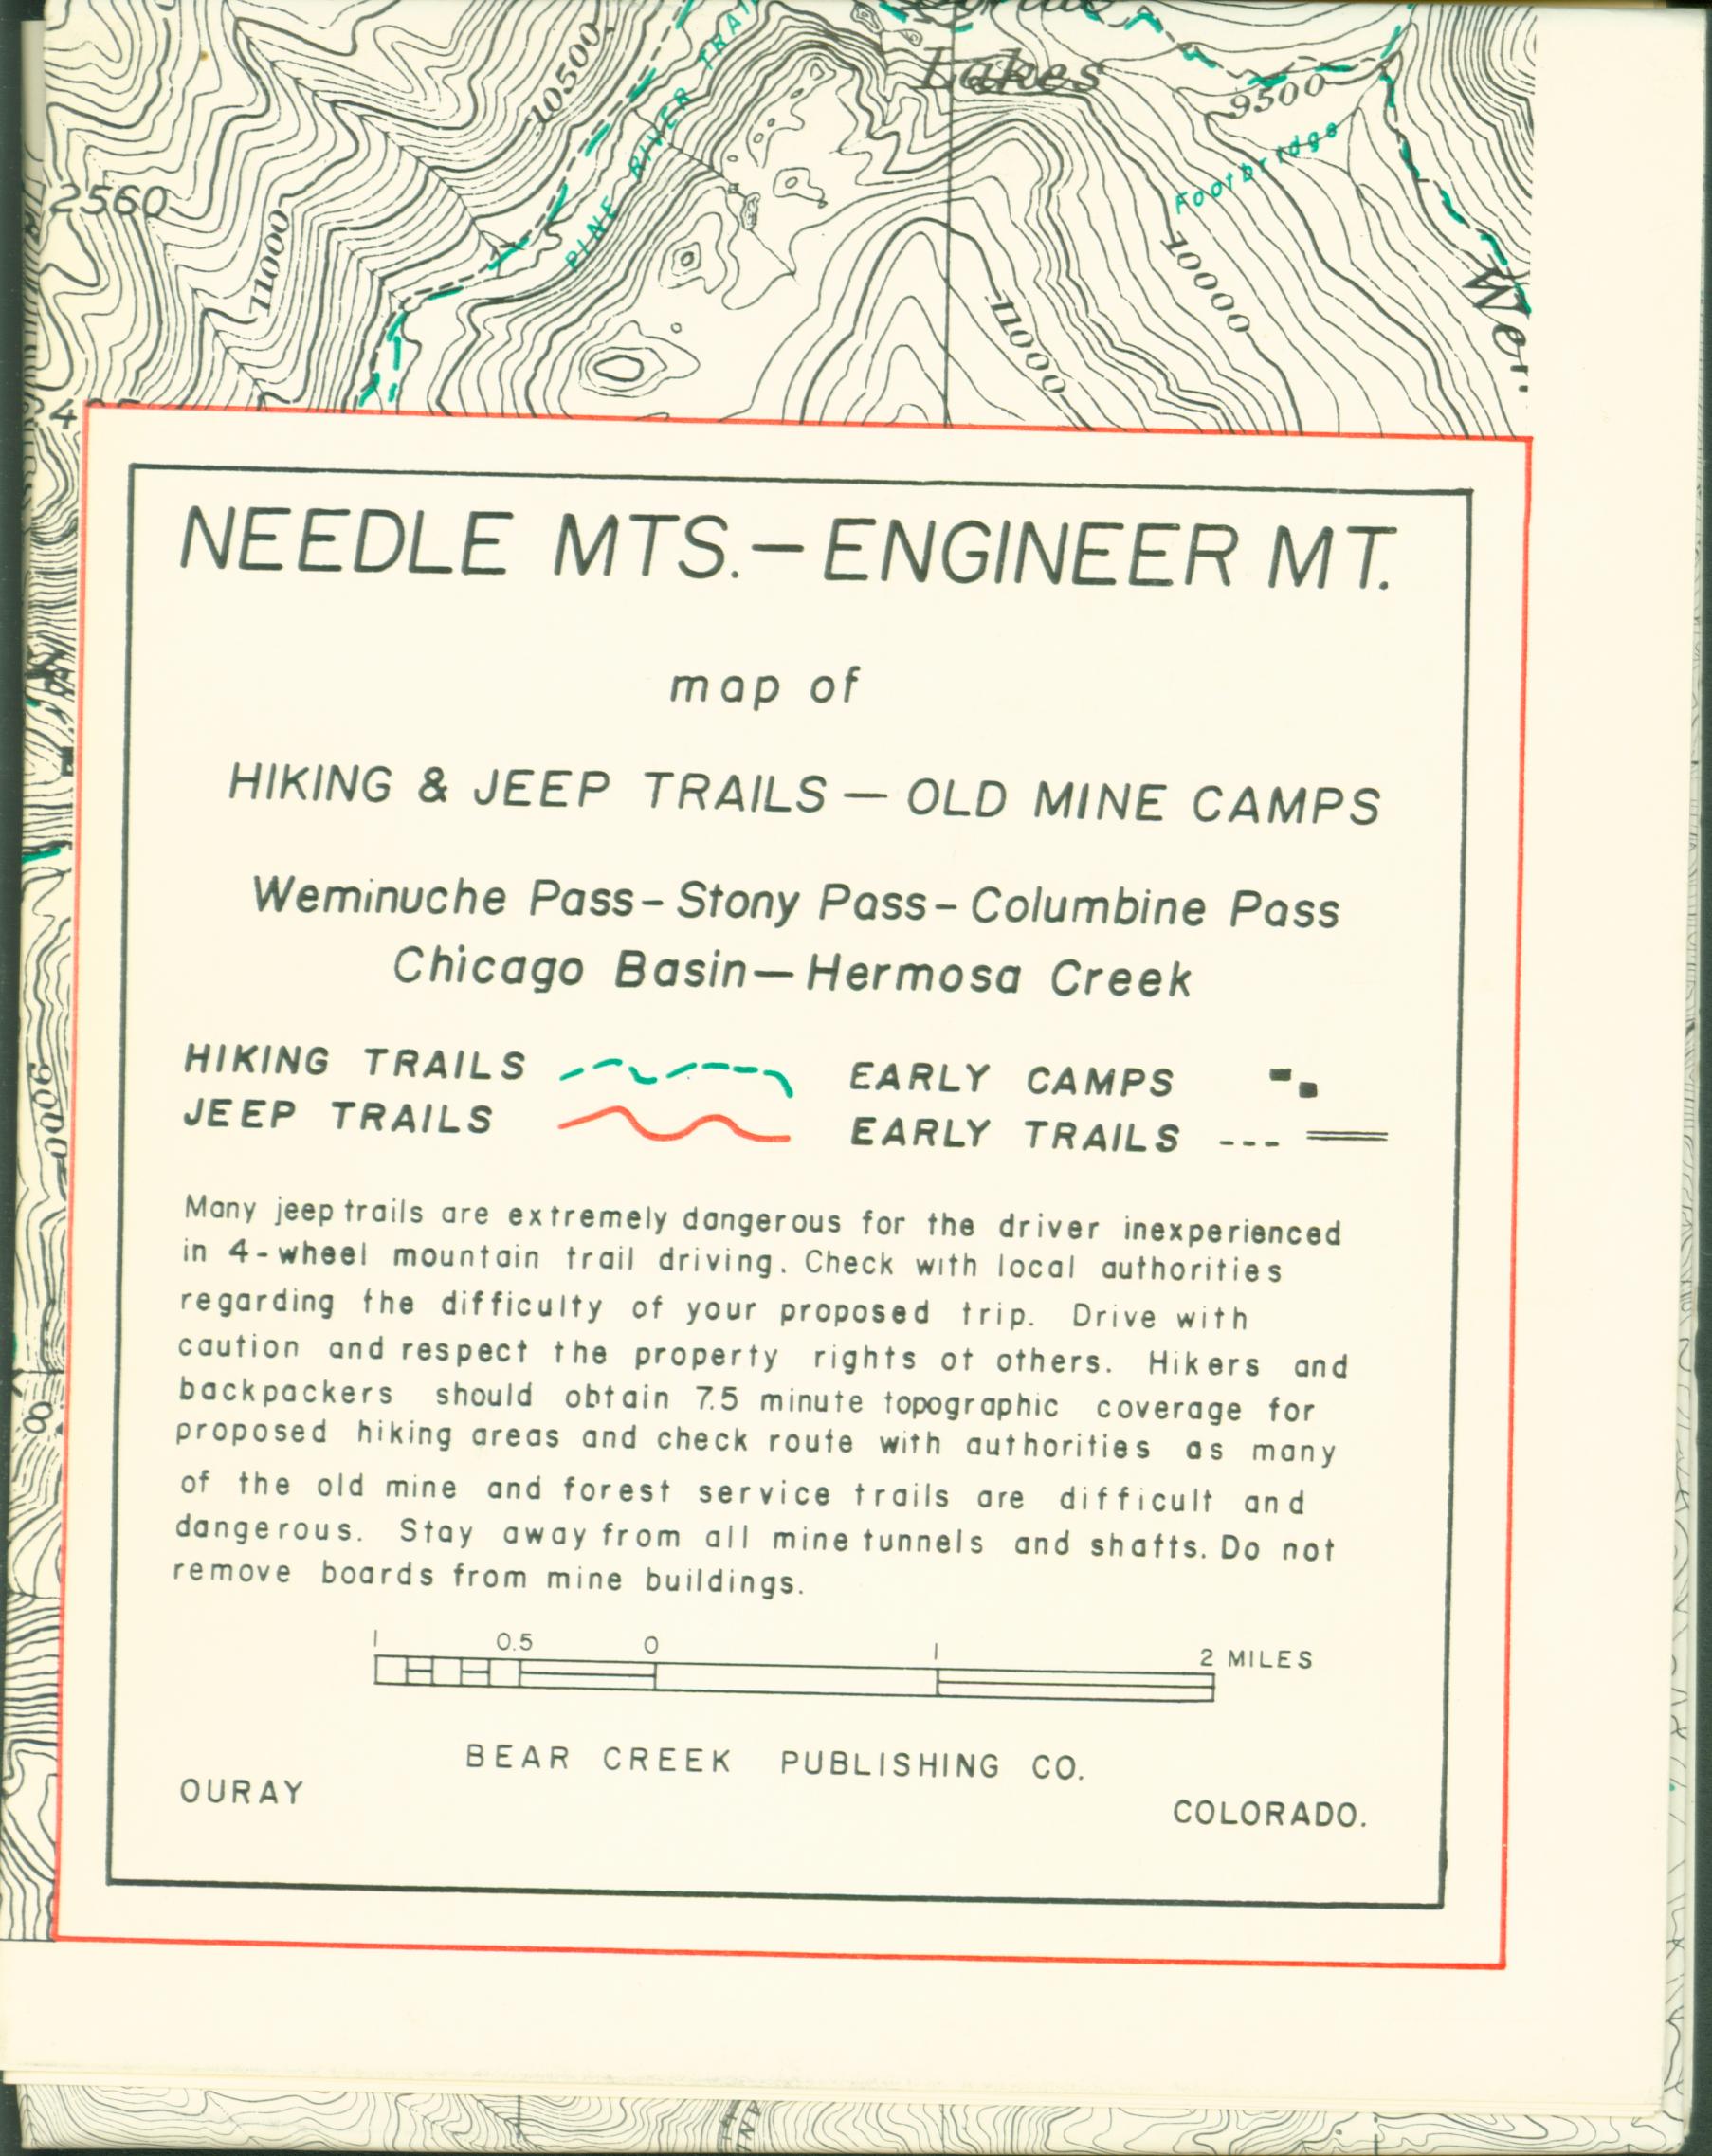 NEEDLE MOUNTAINS/ENGINEER MOUNTAINS map of hiking & jeep trails, old mine camps (CO).